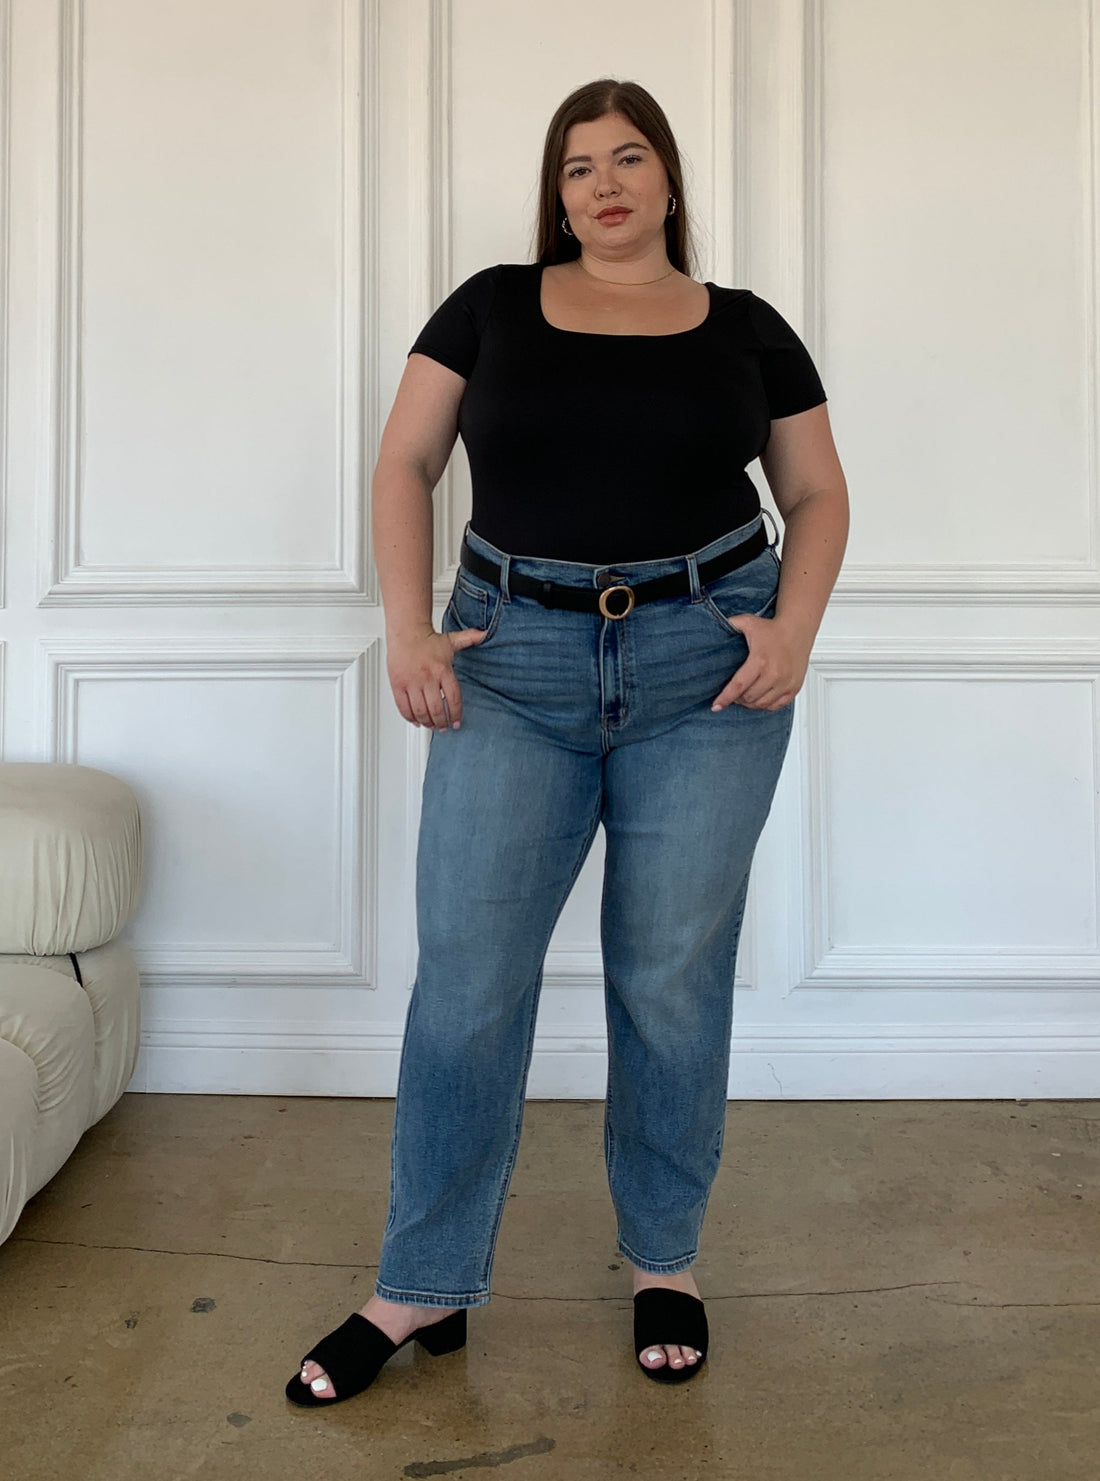 Plus Size Double Layer Cropped Tee Plus Size Tops -2020AVE